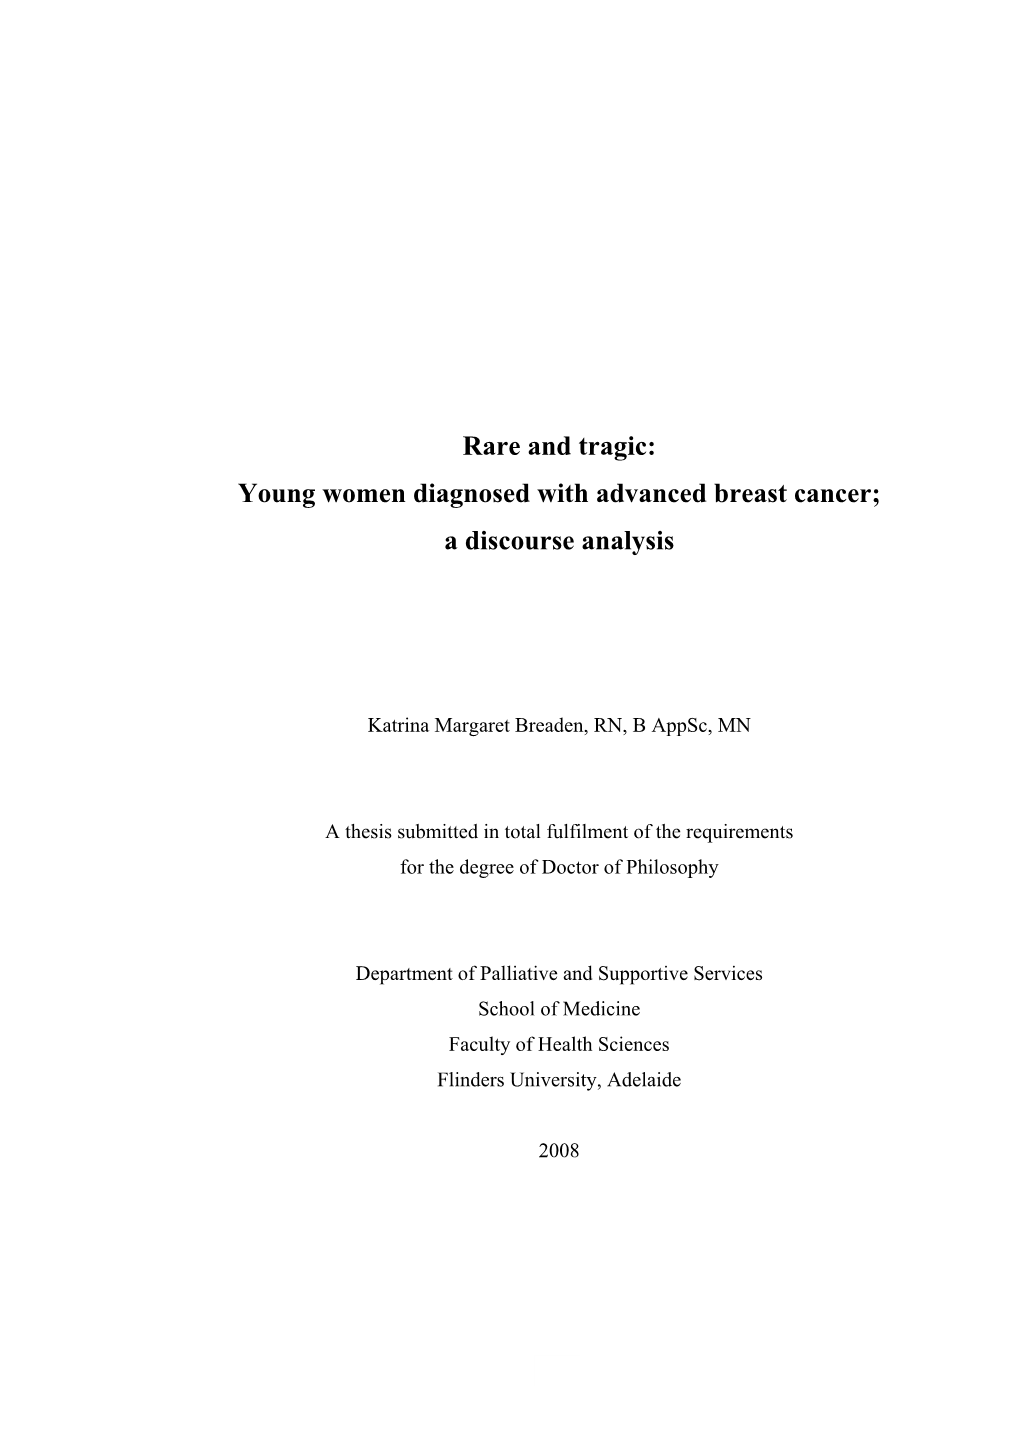 Young Women with Advanced Breast Cancer: a Discourse Analysis